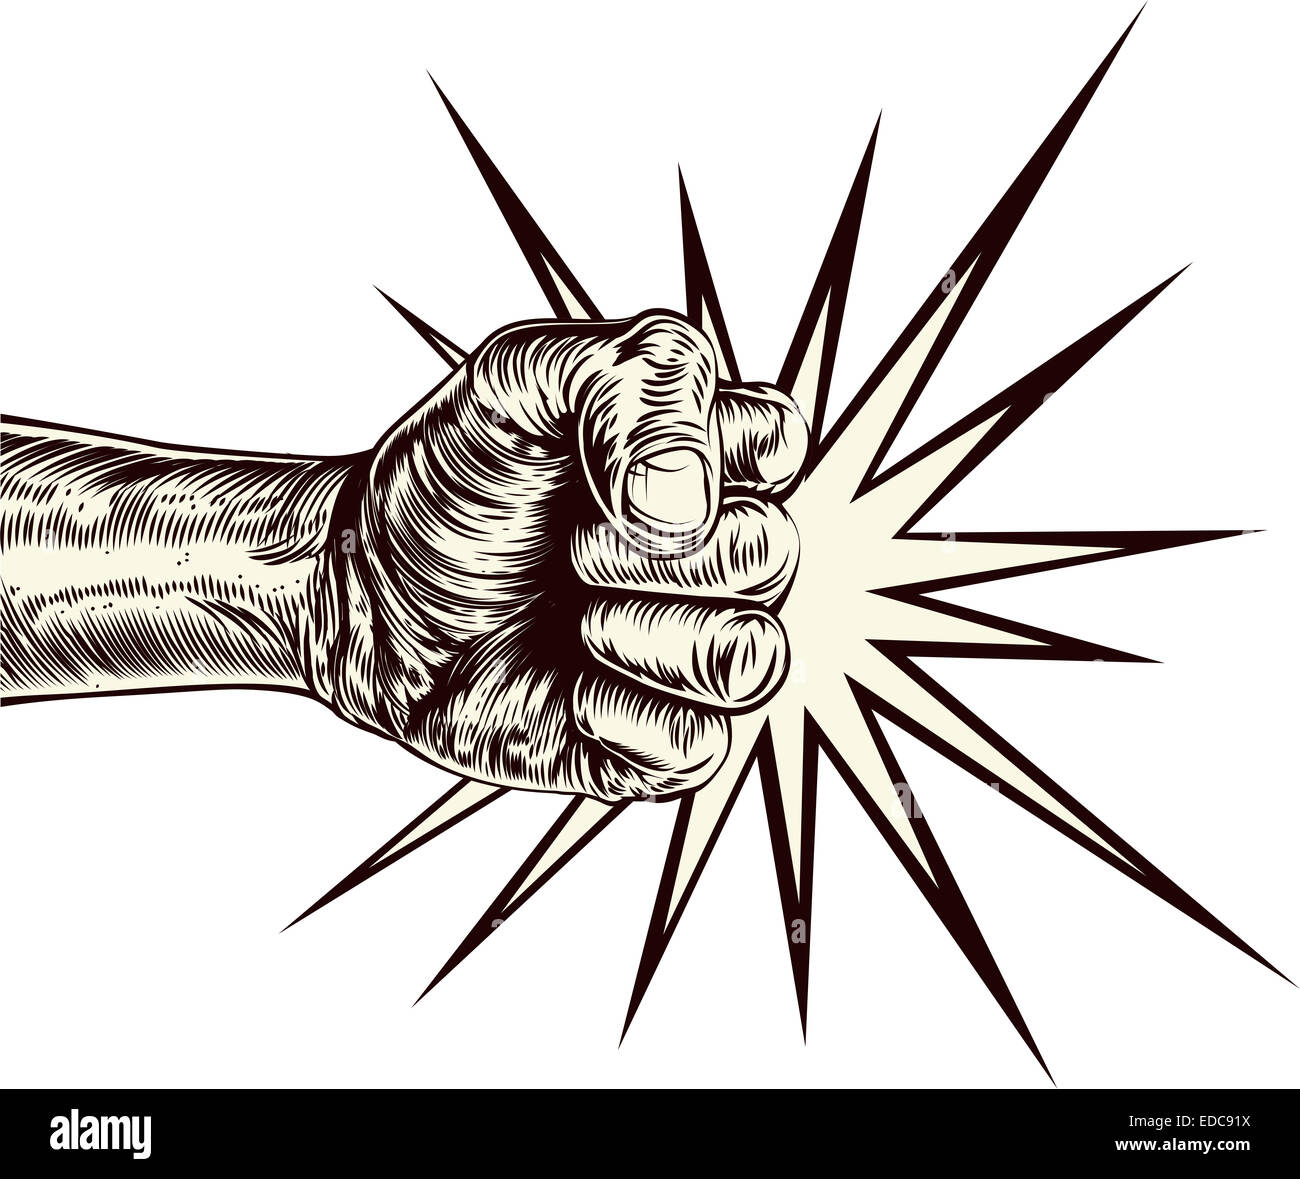 An original illustration of a fist punching in a vintage wood cut style Stock Photo